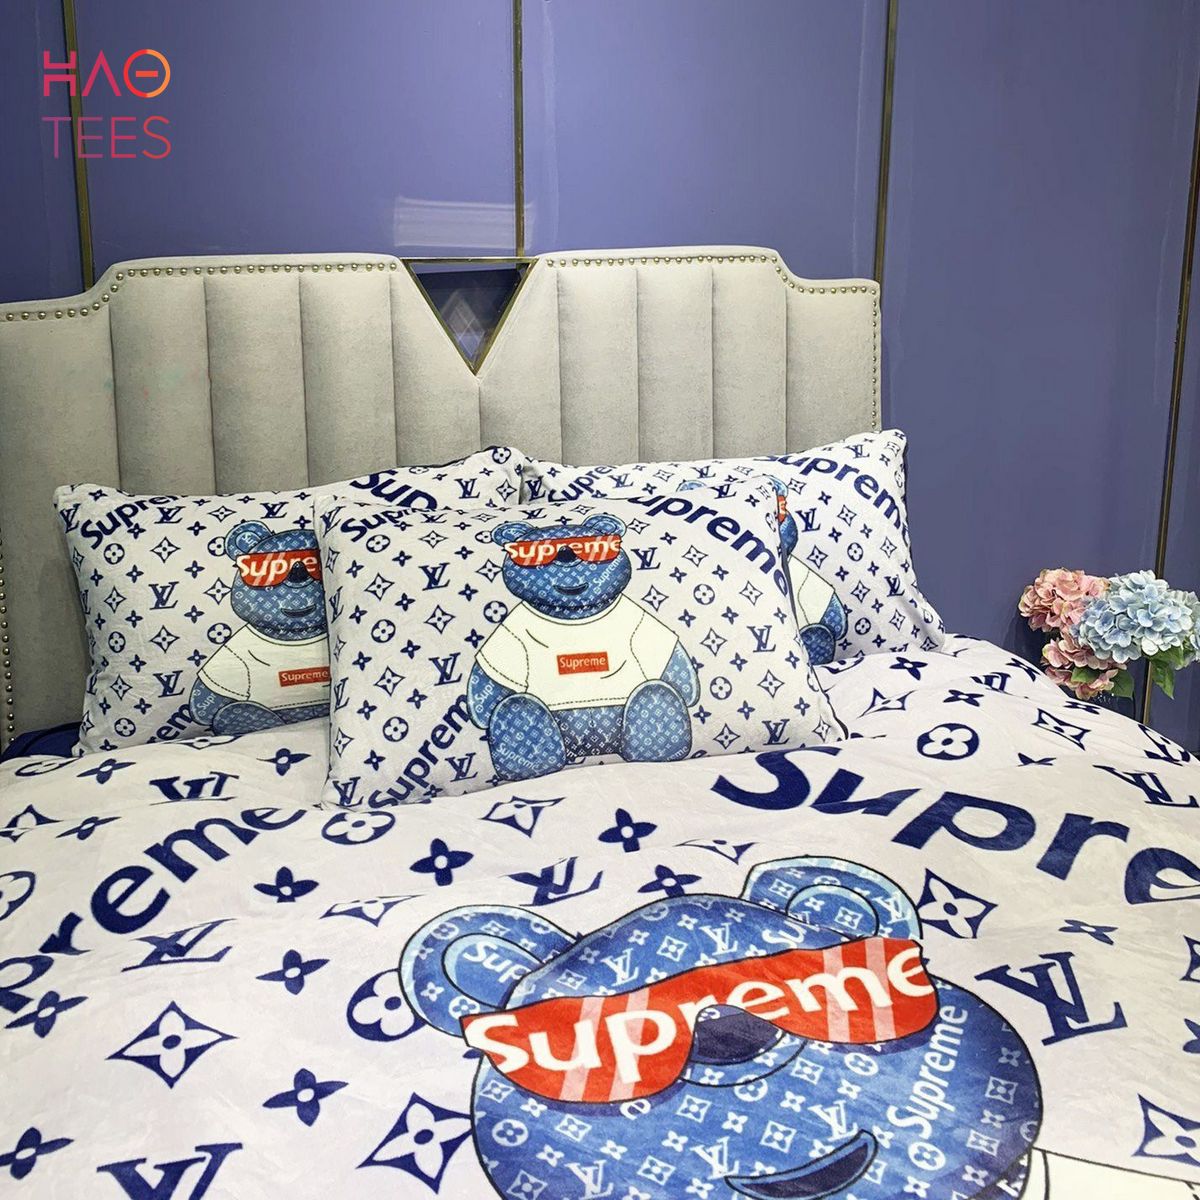 Hot Louis Vuitton Blue Luxury Brand Bedding Sets Limited Edition